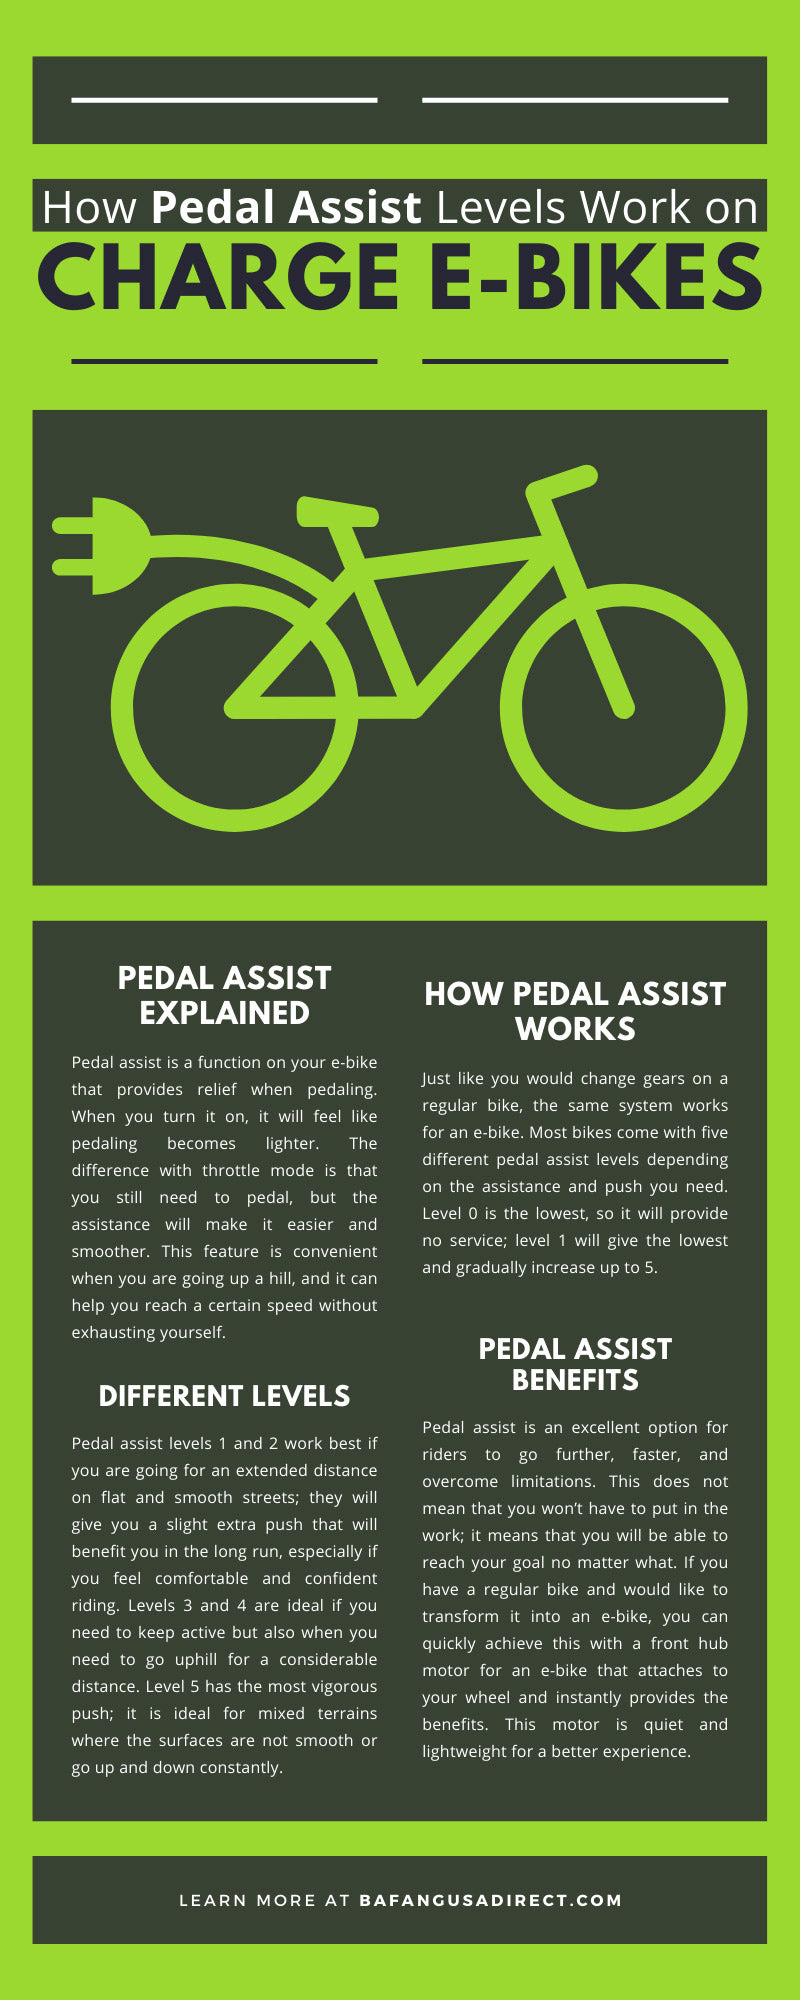 How Pedal Assist Levels Work on Charge E-Bikes